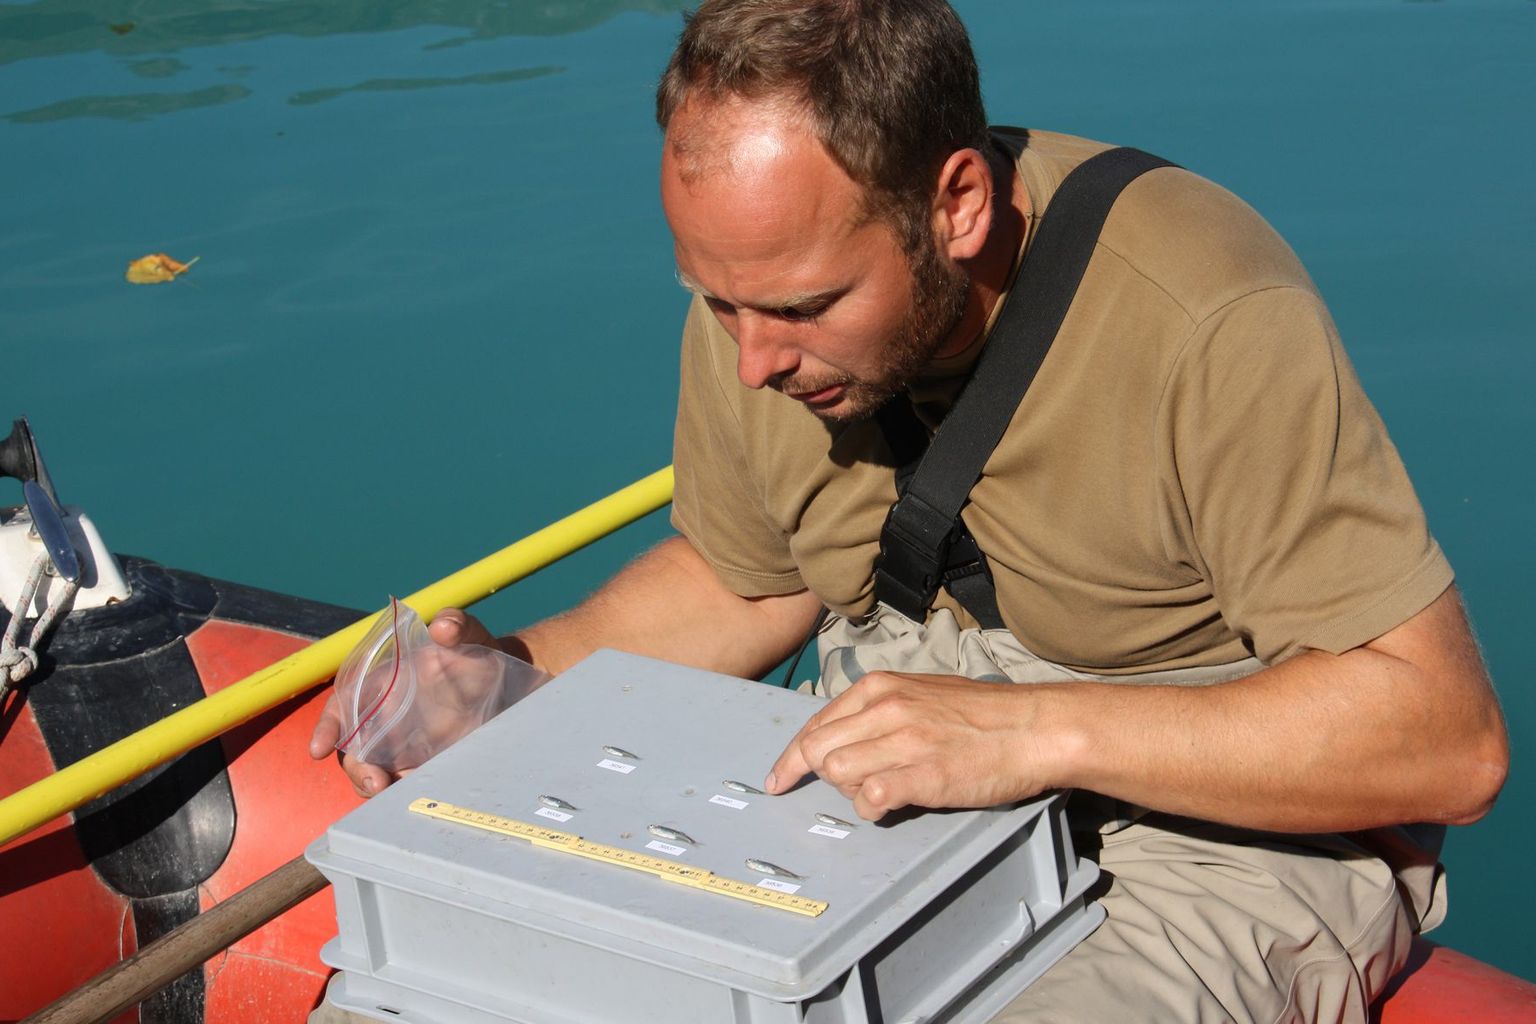 Even the smaller fish are recorded systematically and using standardised methods in Projet Lac, here on Lake Brienz. (eawag)